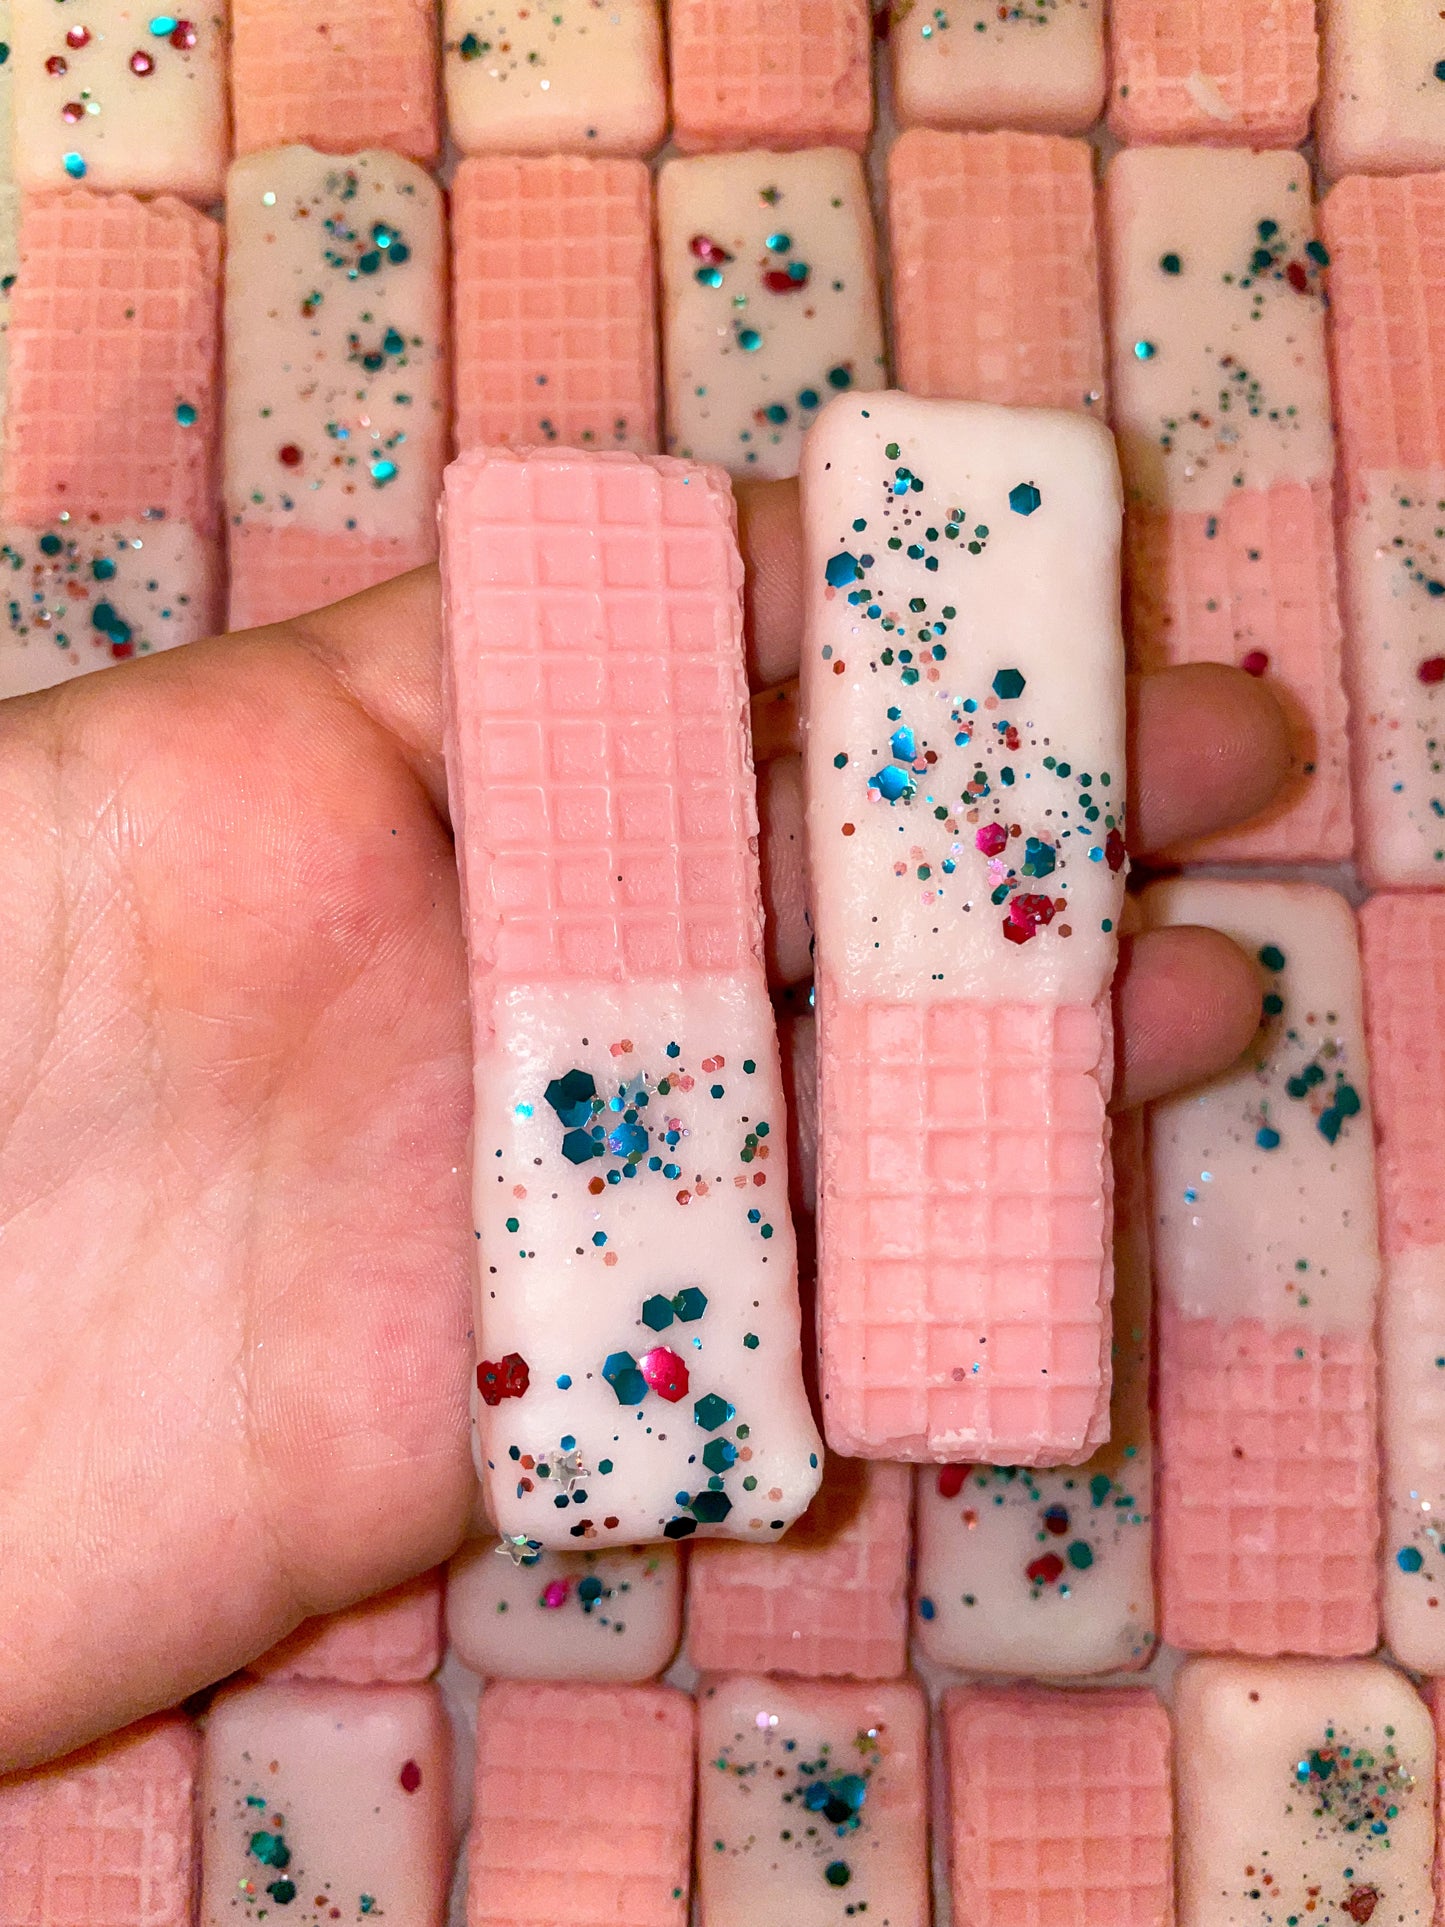 Raspberry cotton candy wafers